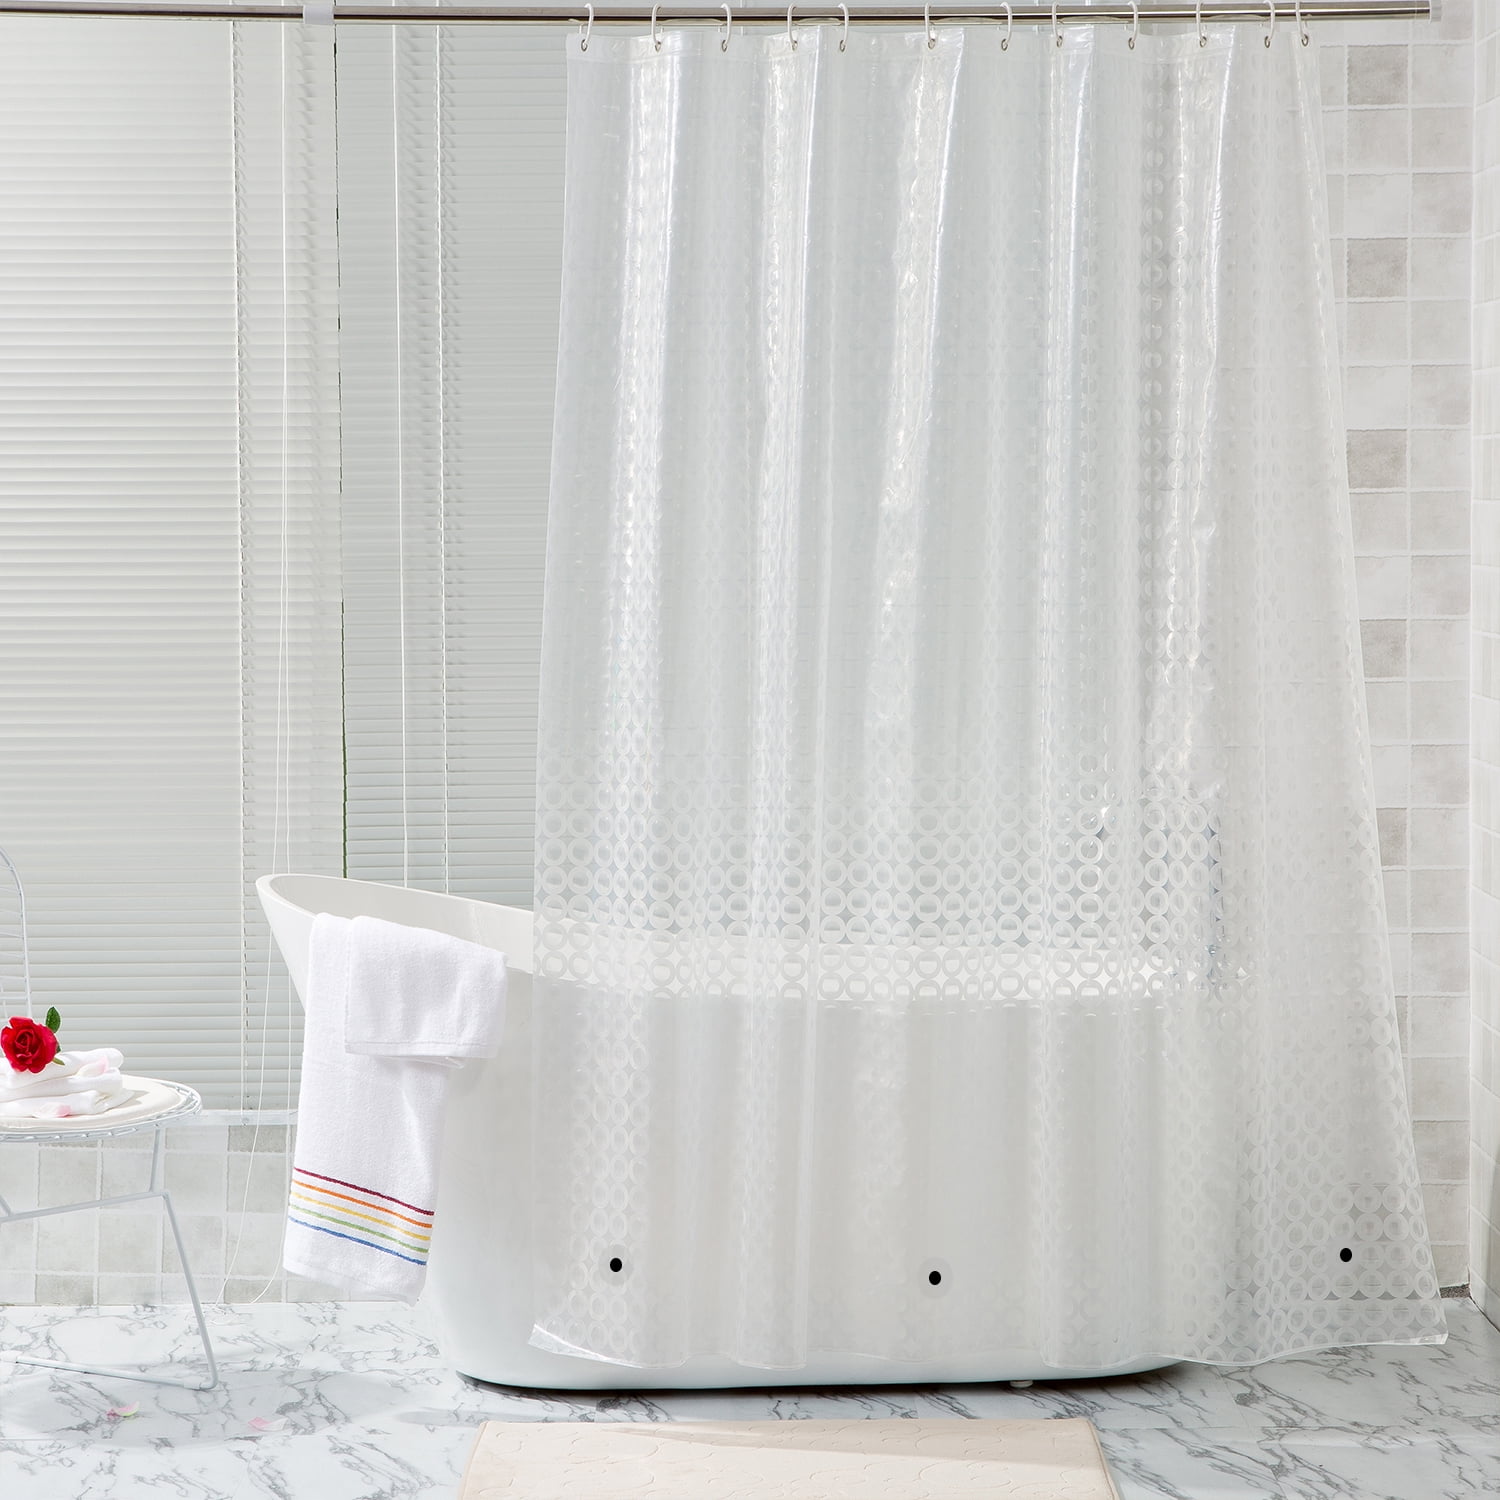 Details about   Feagar EVA Shower Curtain Liner with Magnets & 12 Free Metal Hooks Waterproof 7 